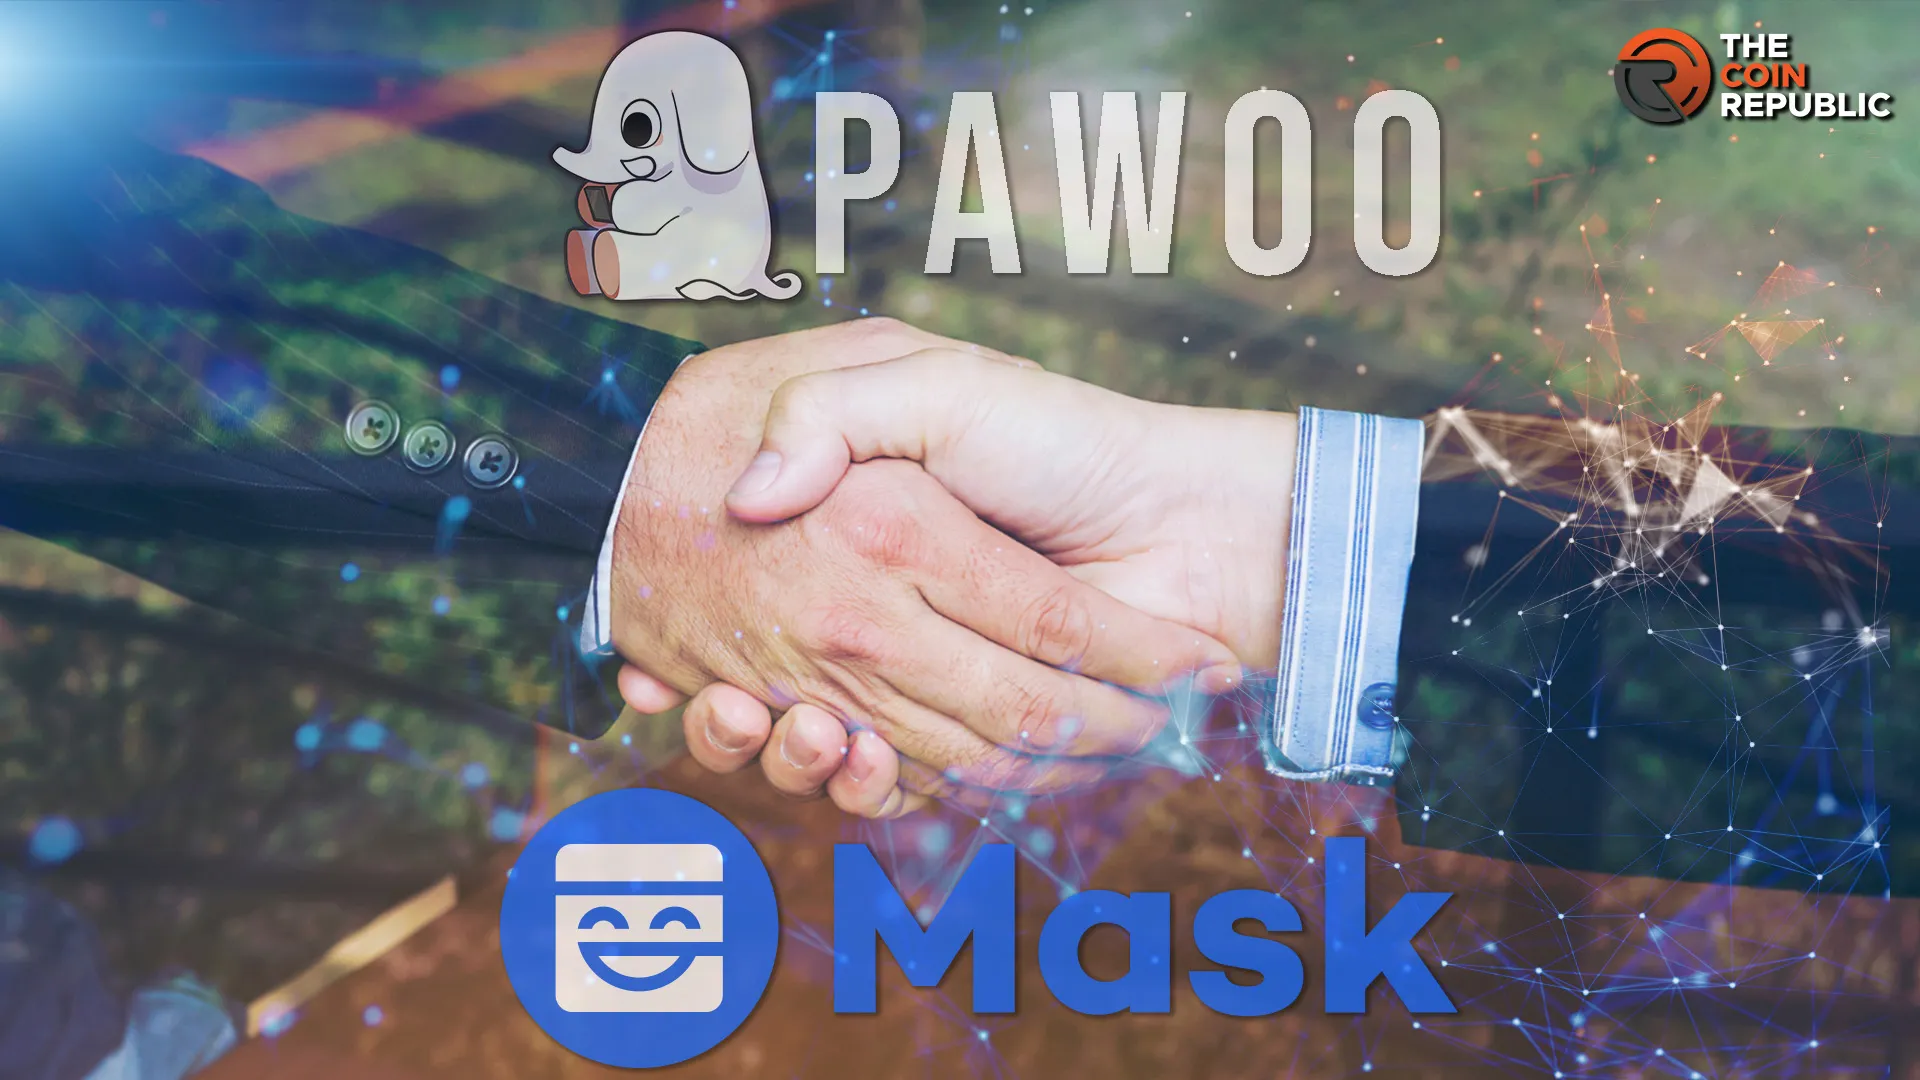 Pawoo.net Acquired By Mask Network, A Detailed Analysis